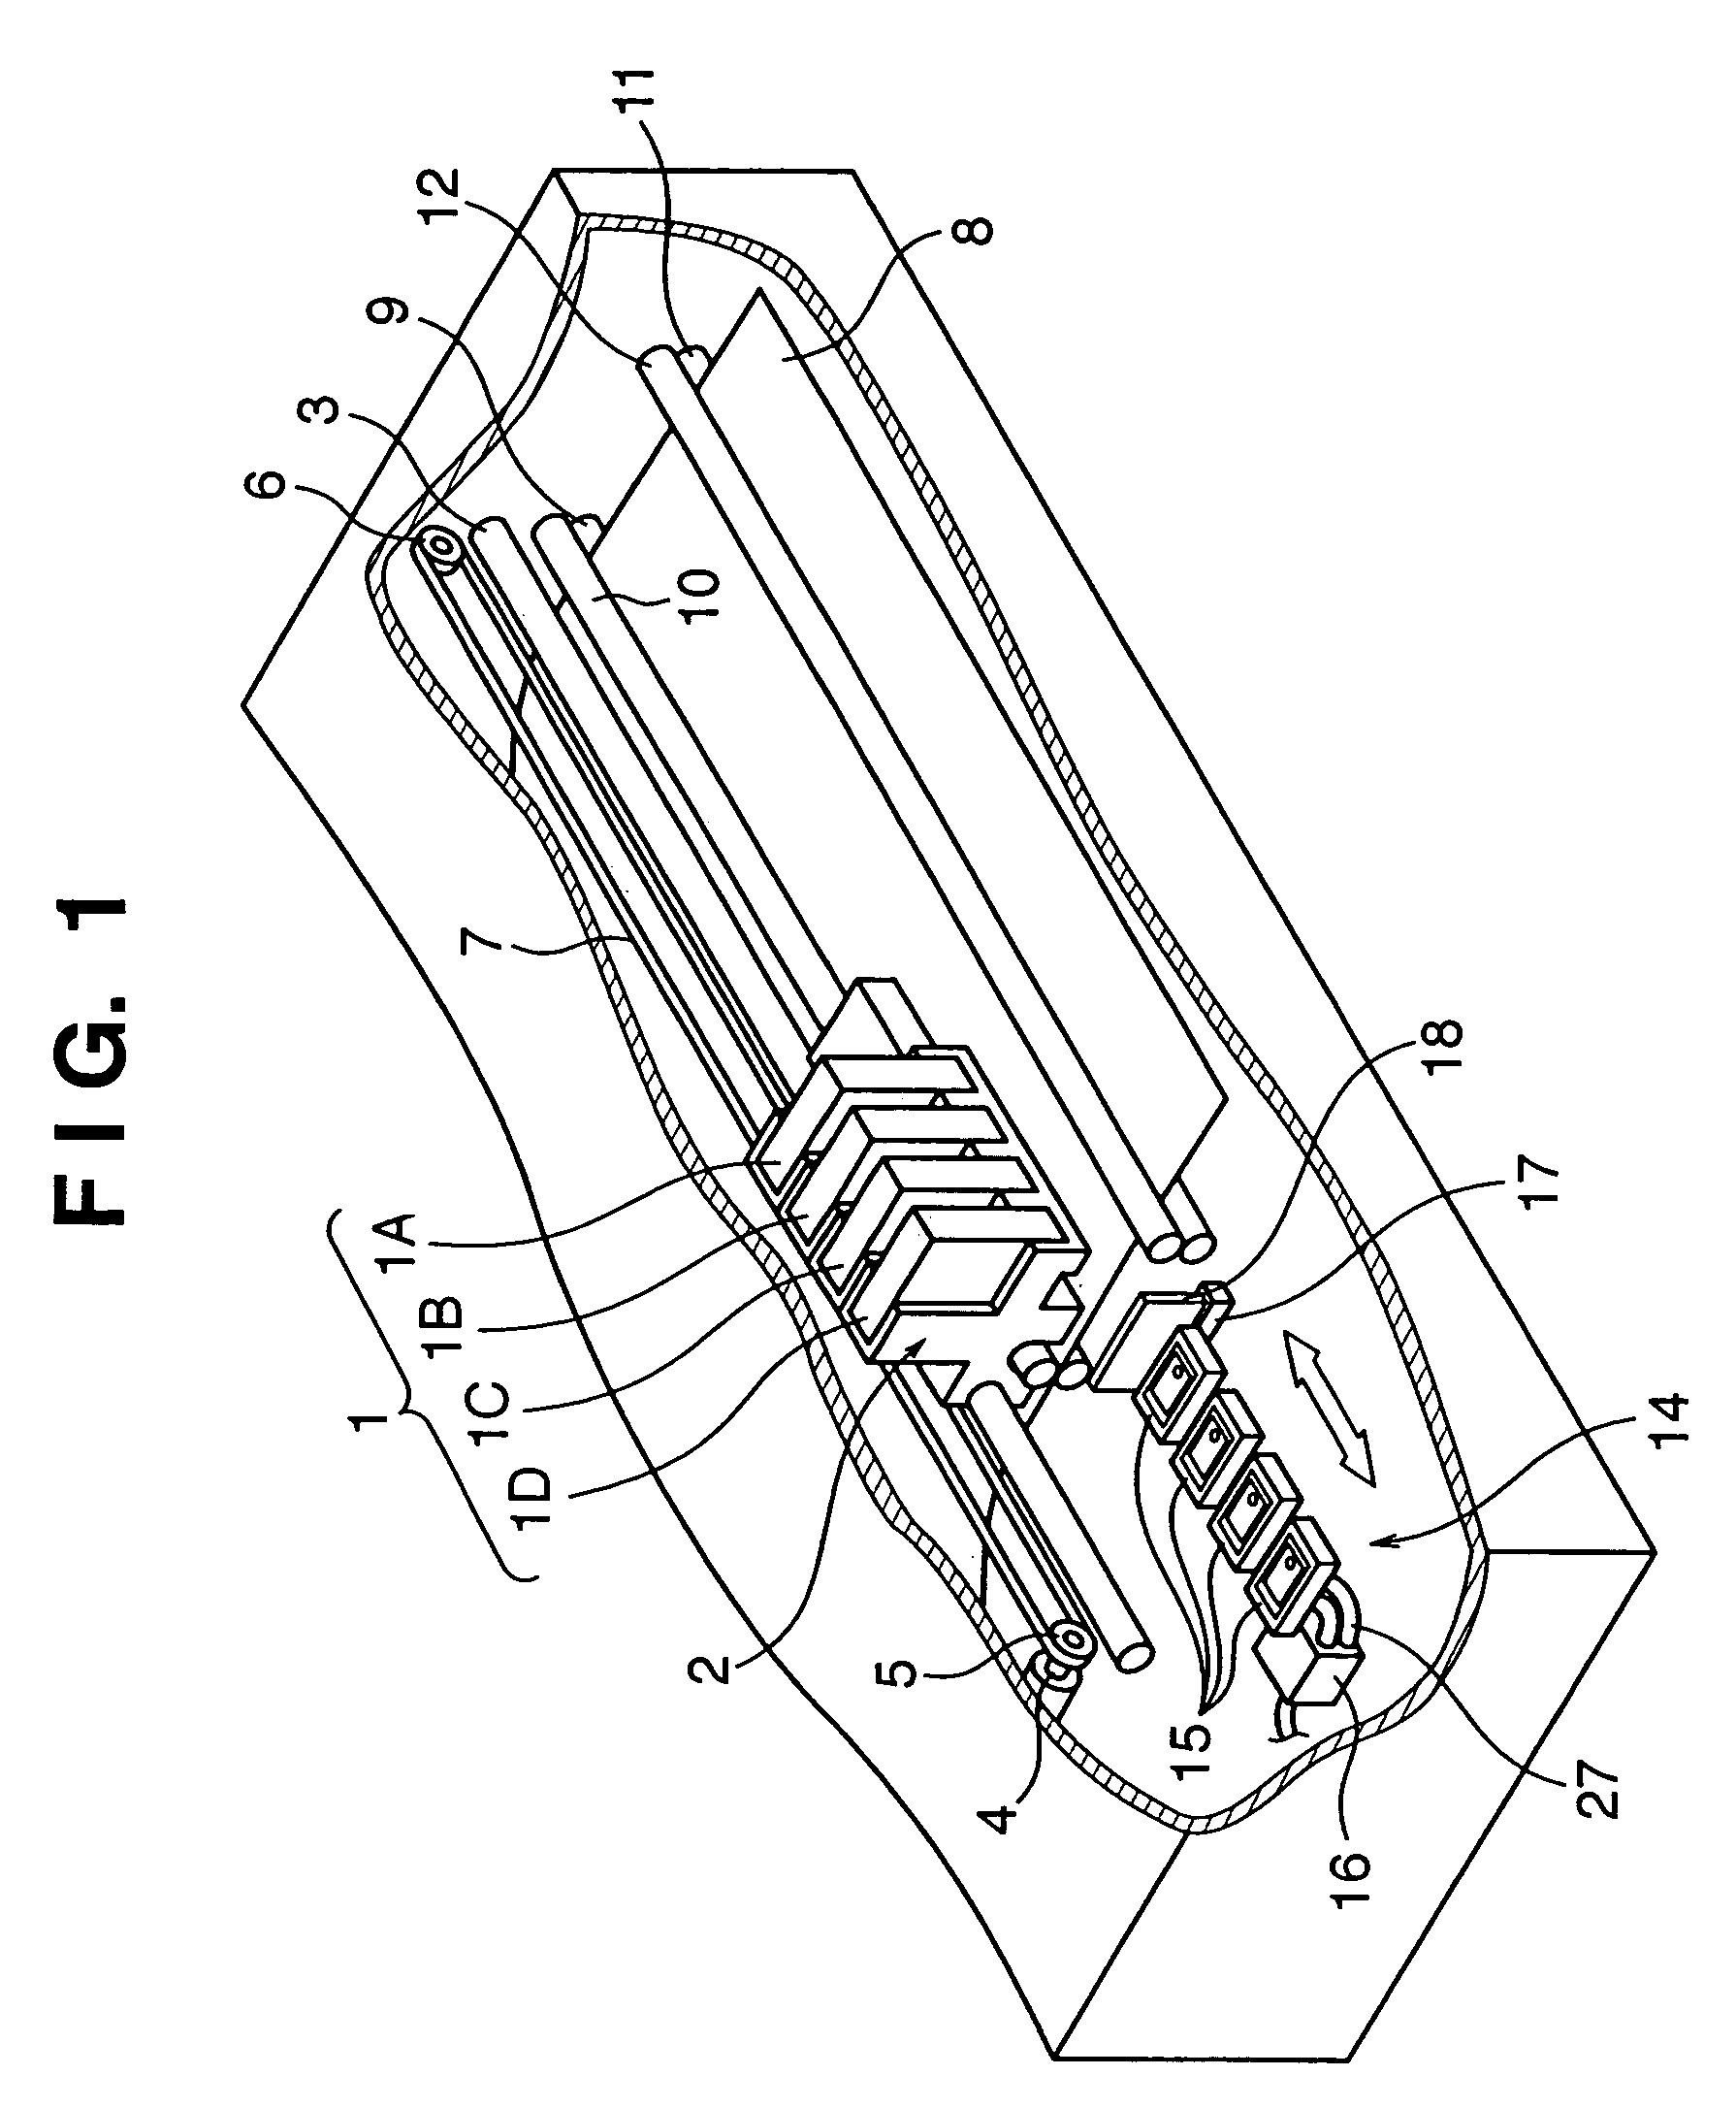 Ink jet printing apparatus and printing position setting method of the apparatus